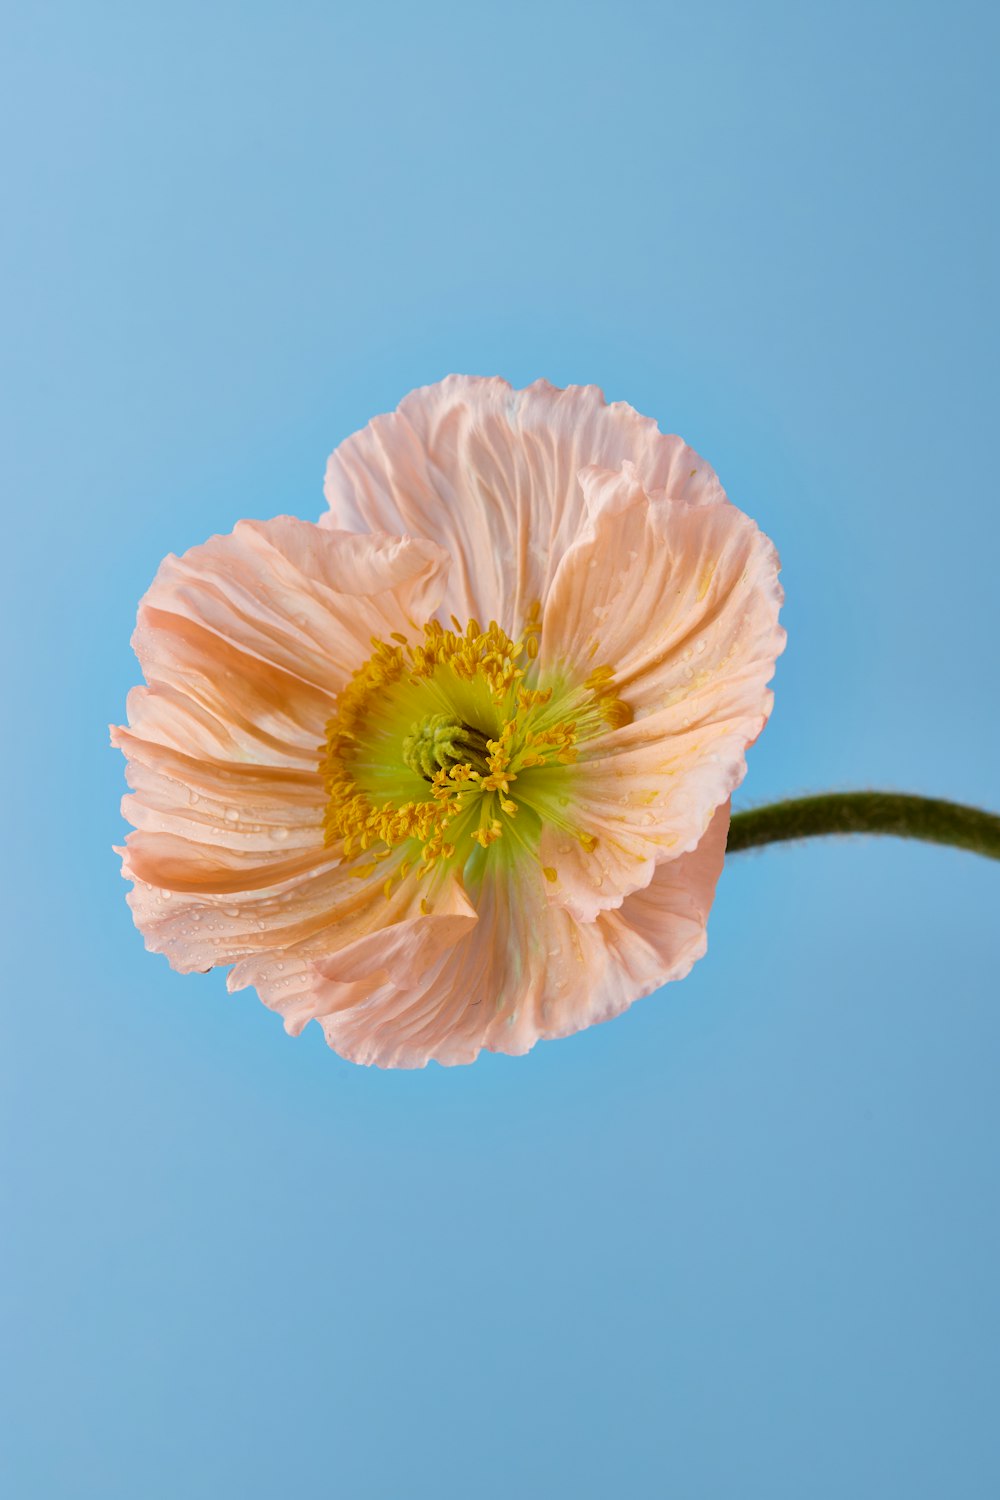 a pink flower with a green center on a blue background